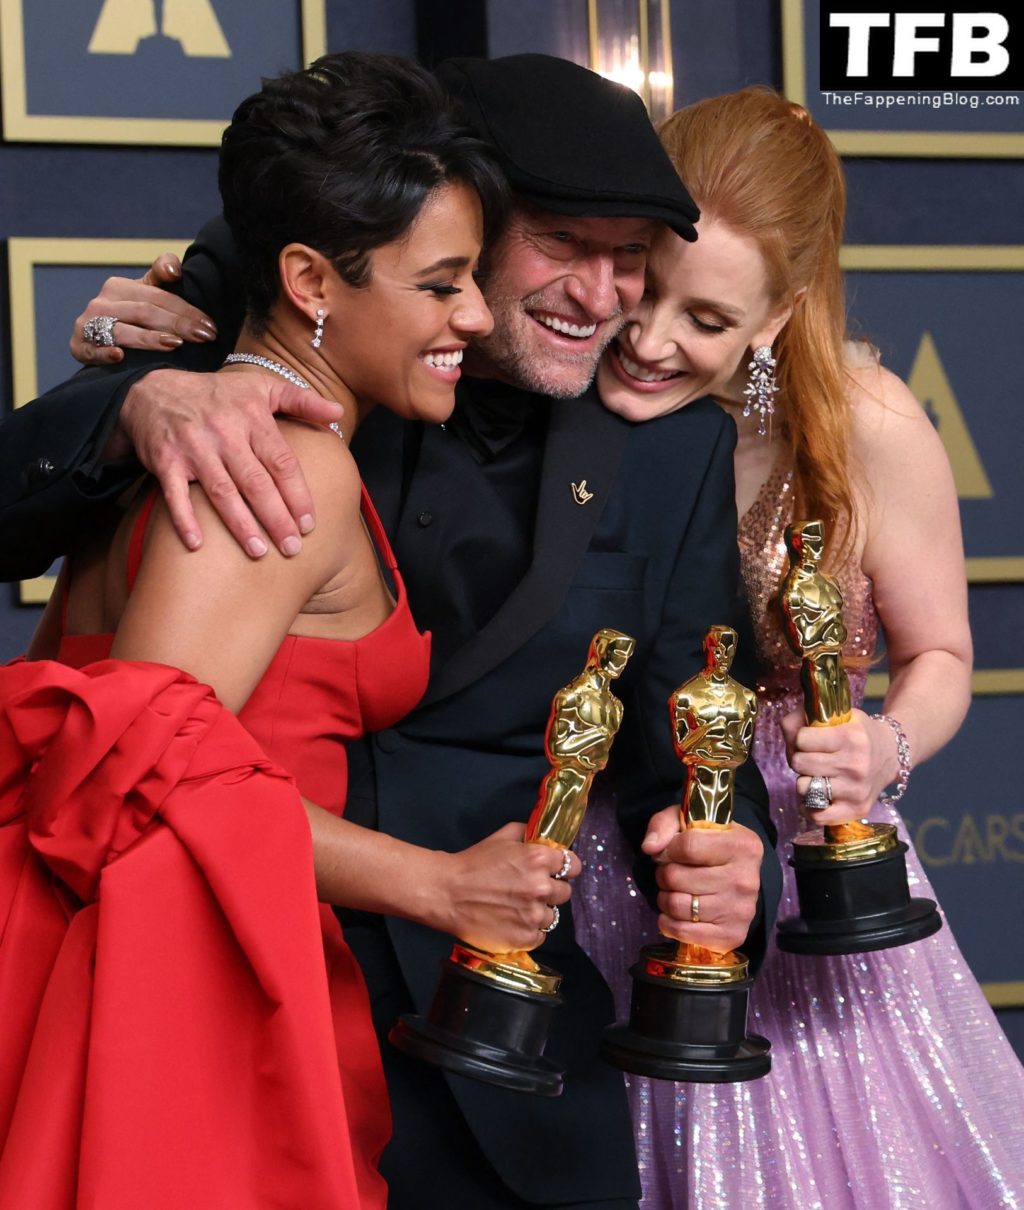 Jessica Chastain Sexy The Fappening Blog 130 1024x1210 - Jessica Chastain Poses With Her Oscar at the 94th Academy Awards (150 Photos)